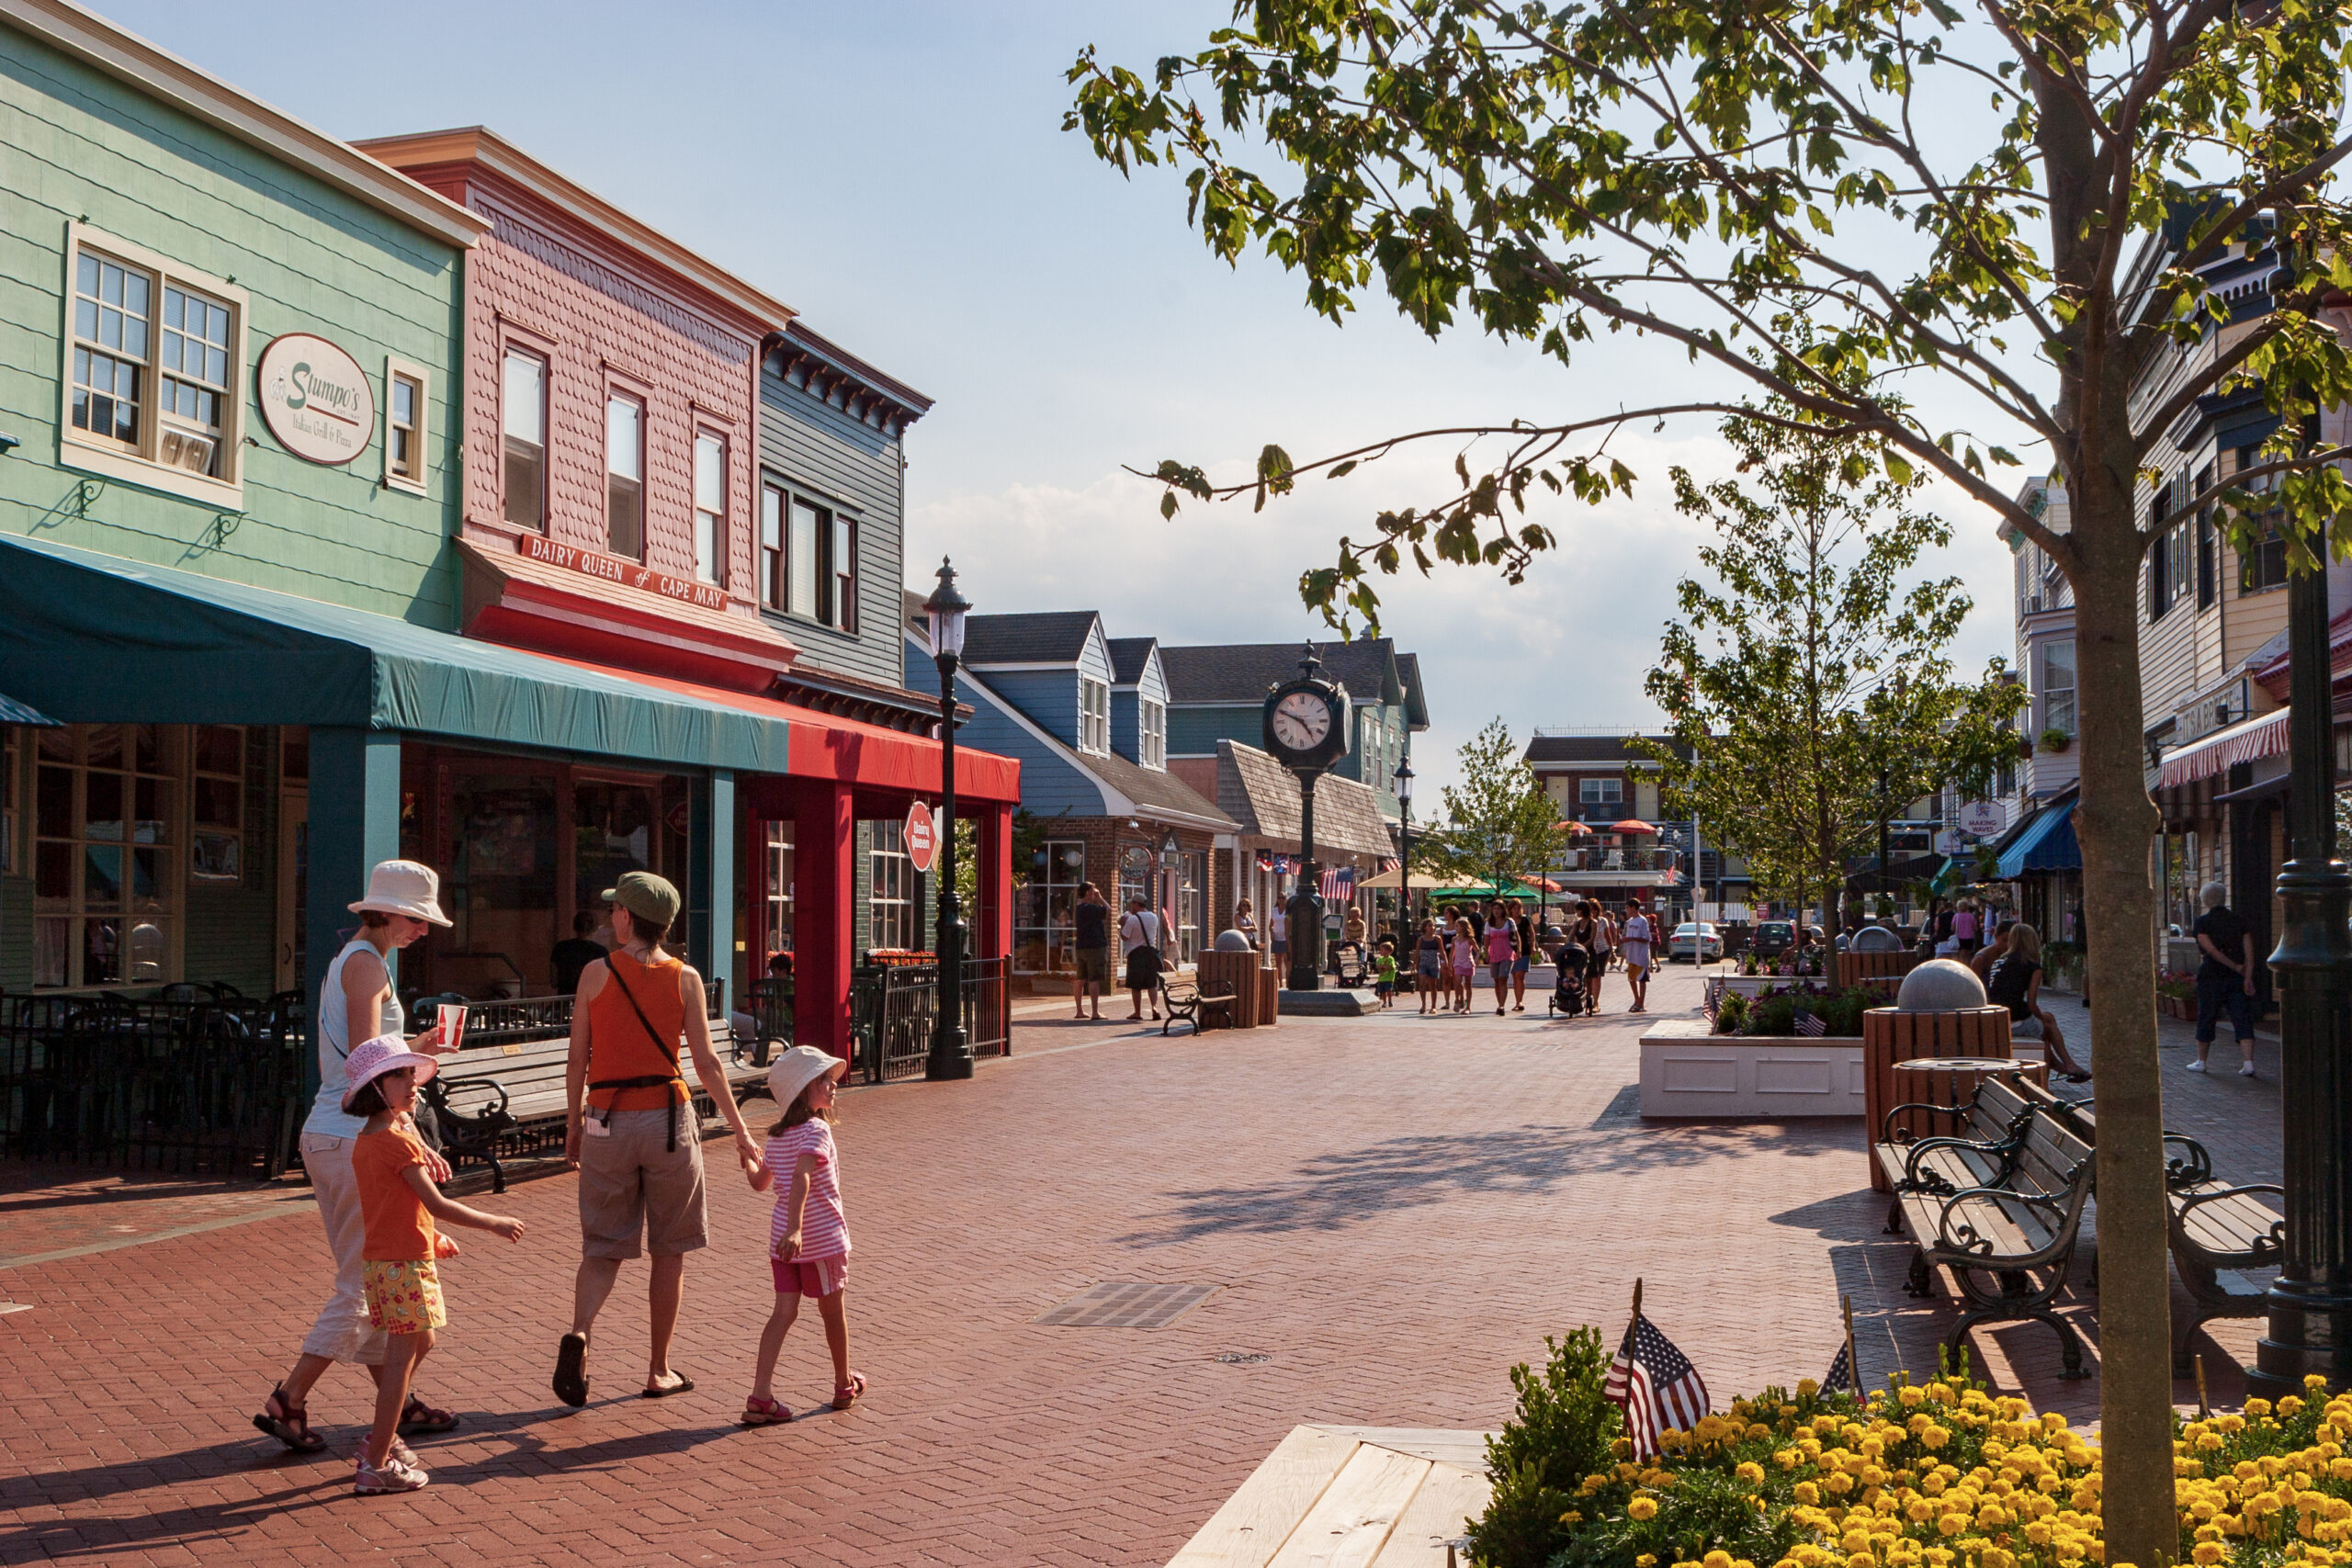 Cape May, NJ, USA: Tourists walk through Washington Street Mall, lined with specialy boutiques, eateries and shops. Cape May is considered one of the most beautiful towns in the US.